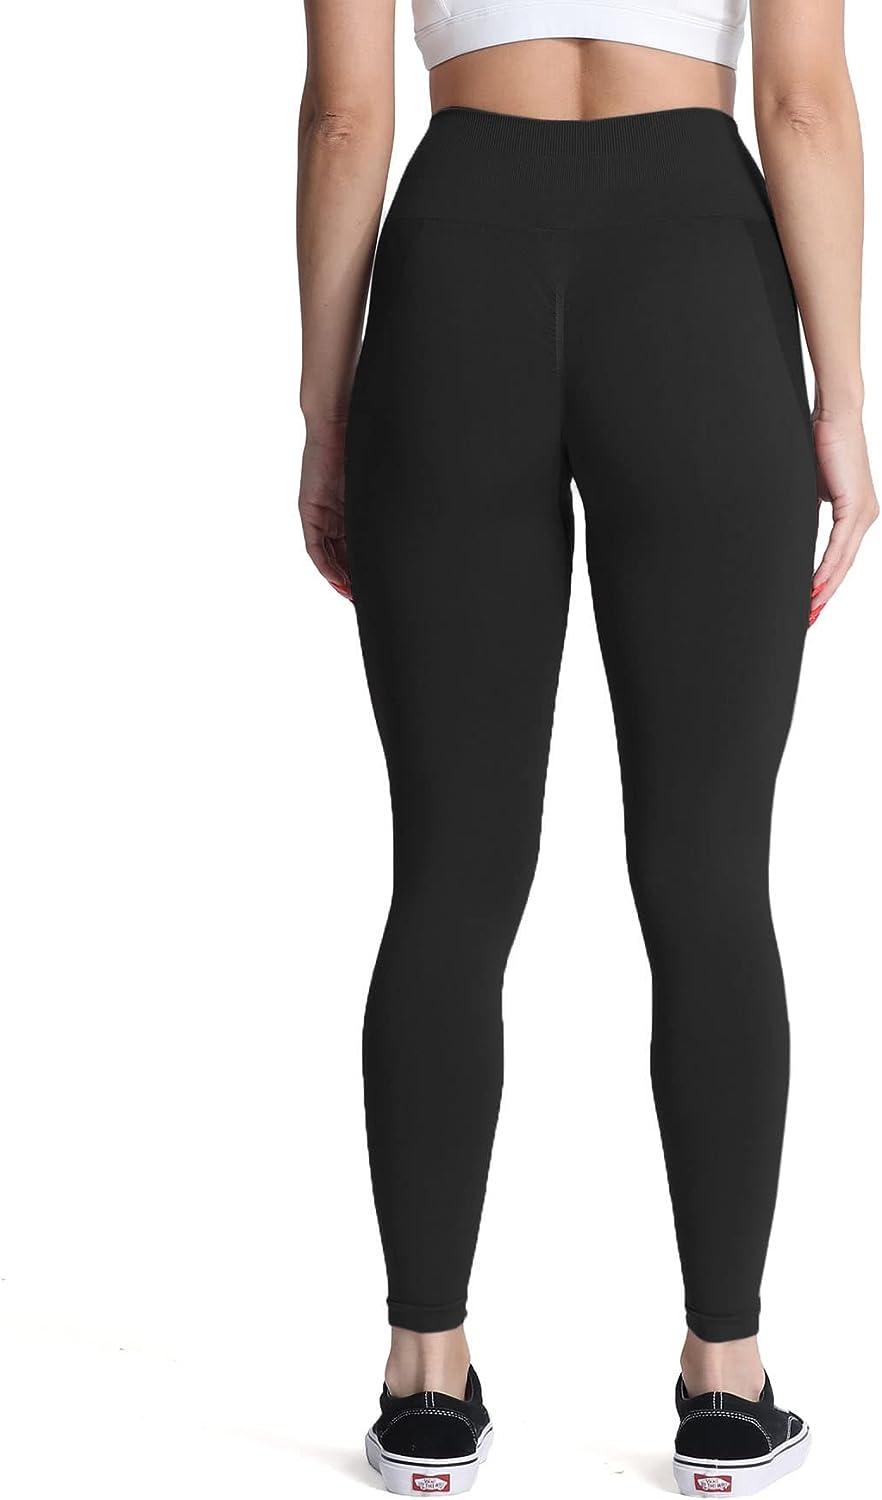 Aoxjox Workout Seamless Leggings for Women High Waisted Exercise